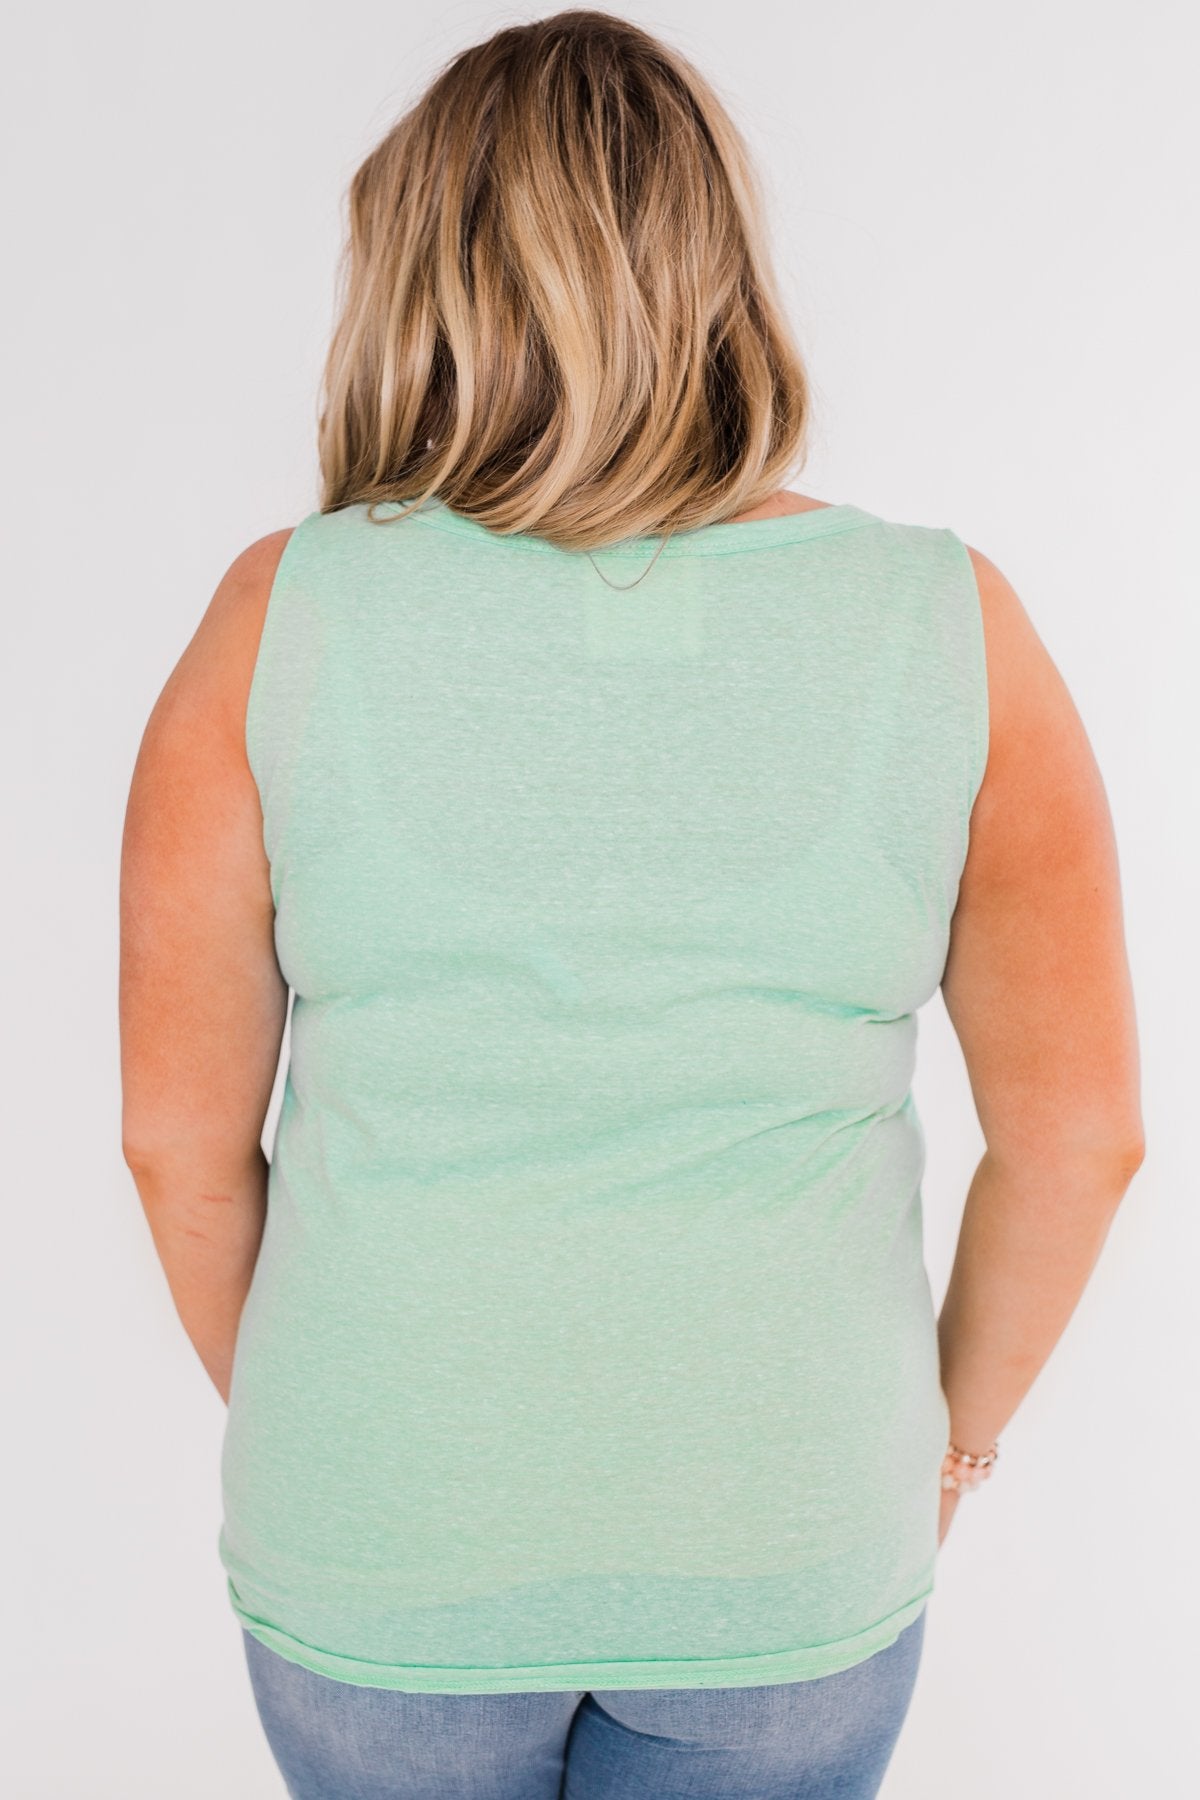 Everyday Button Tie Tank Top- Mint